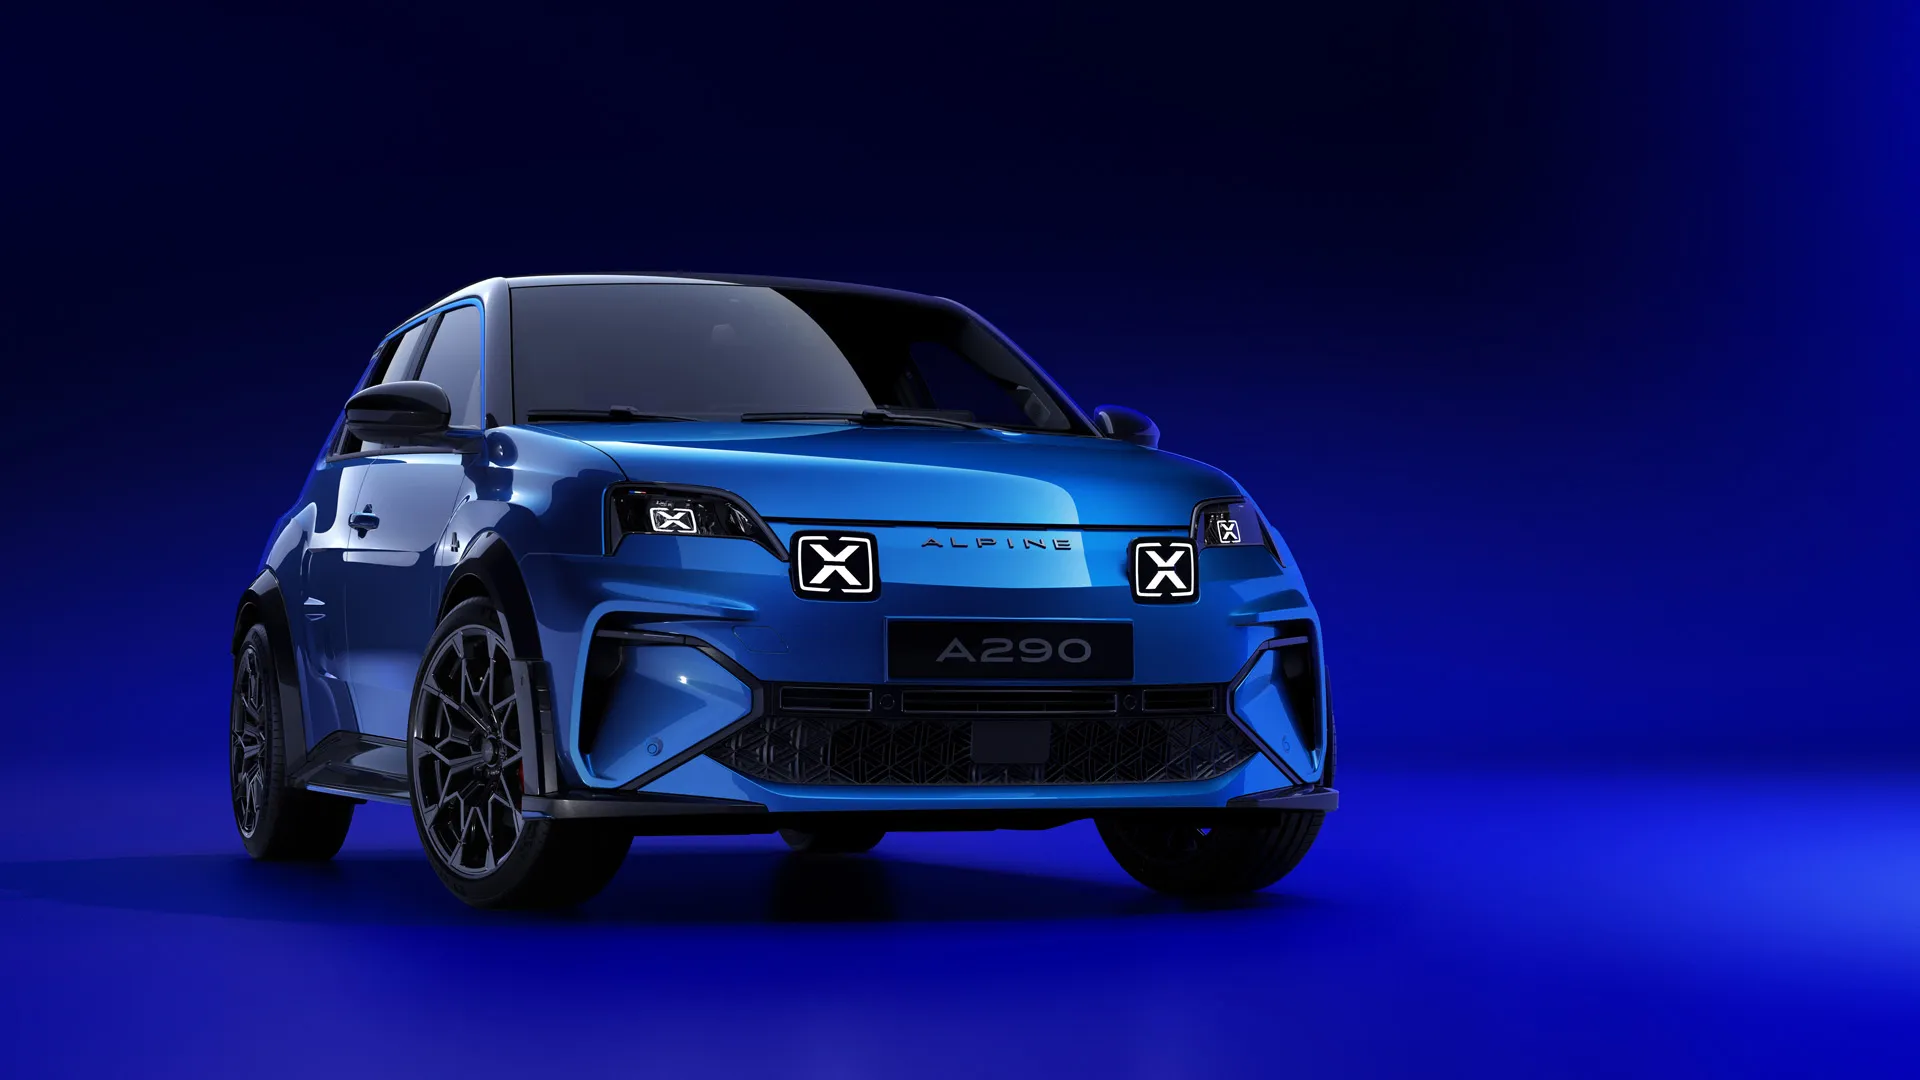 Alpine A290 electric hatch debuts with 220 hp.